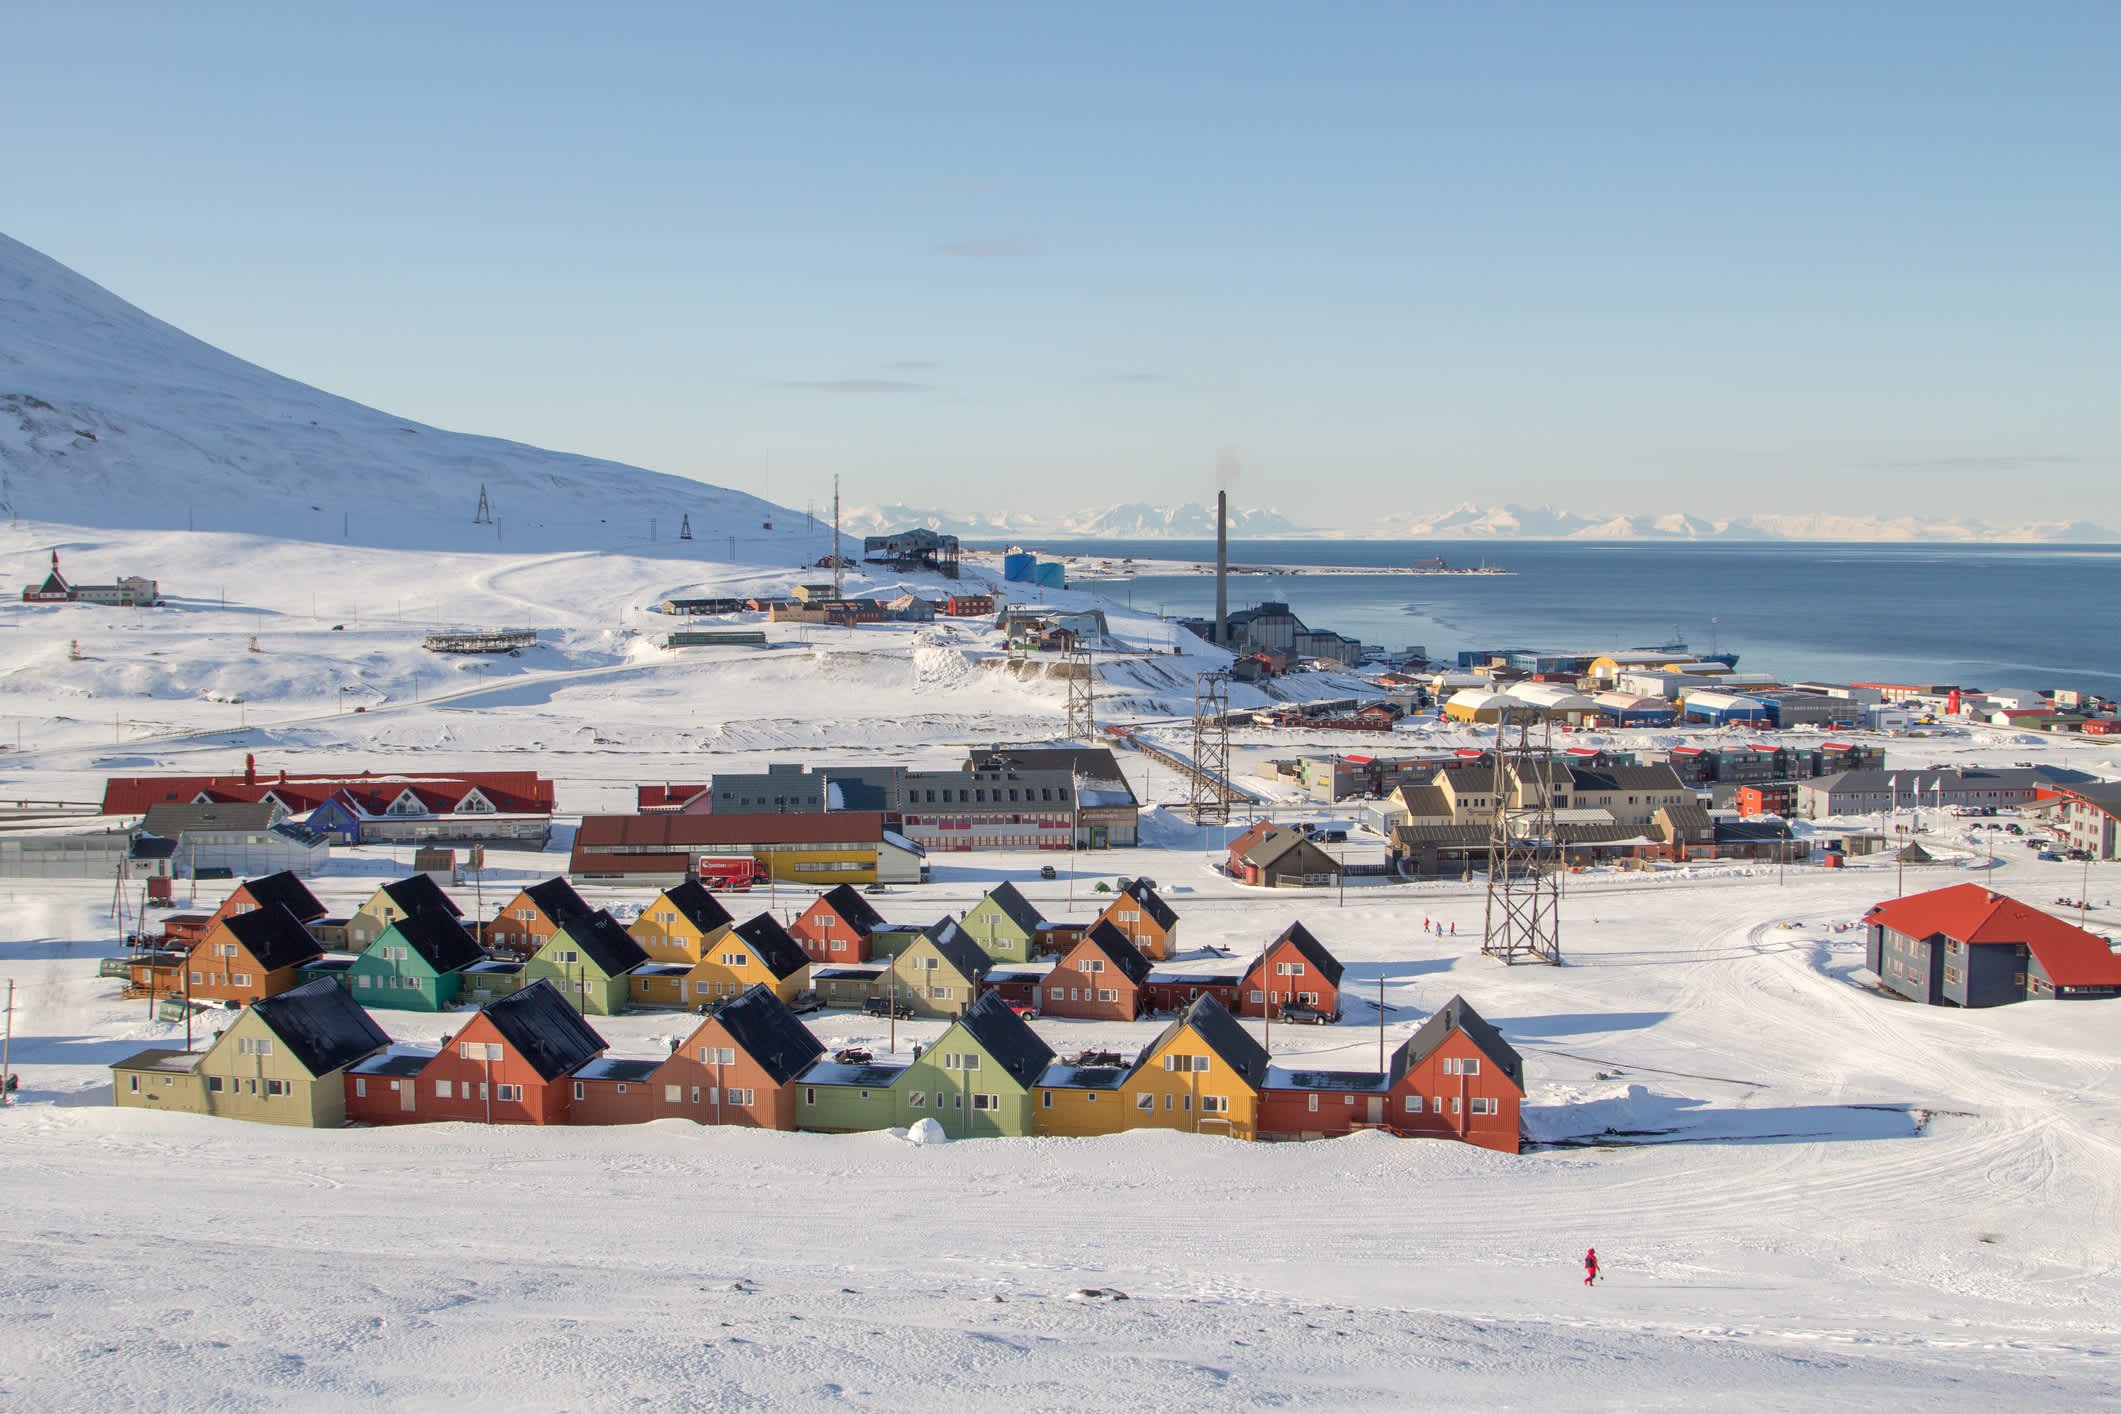 The town of Longyearbyen, the largest community on Svalbard.